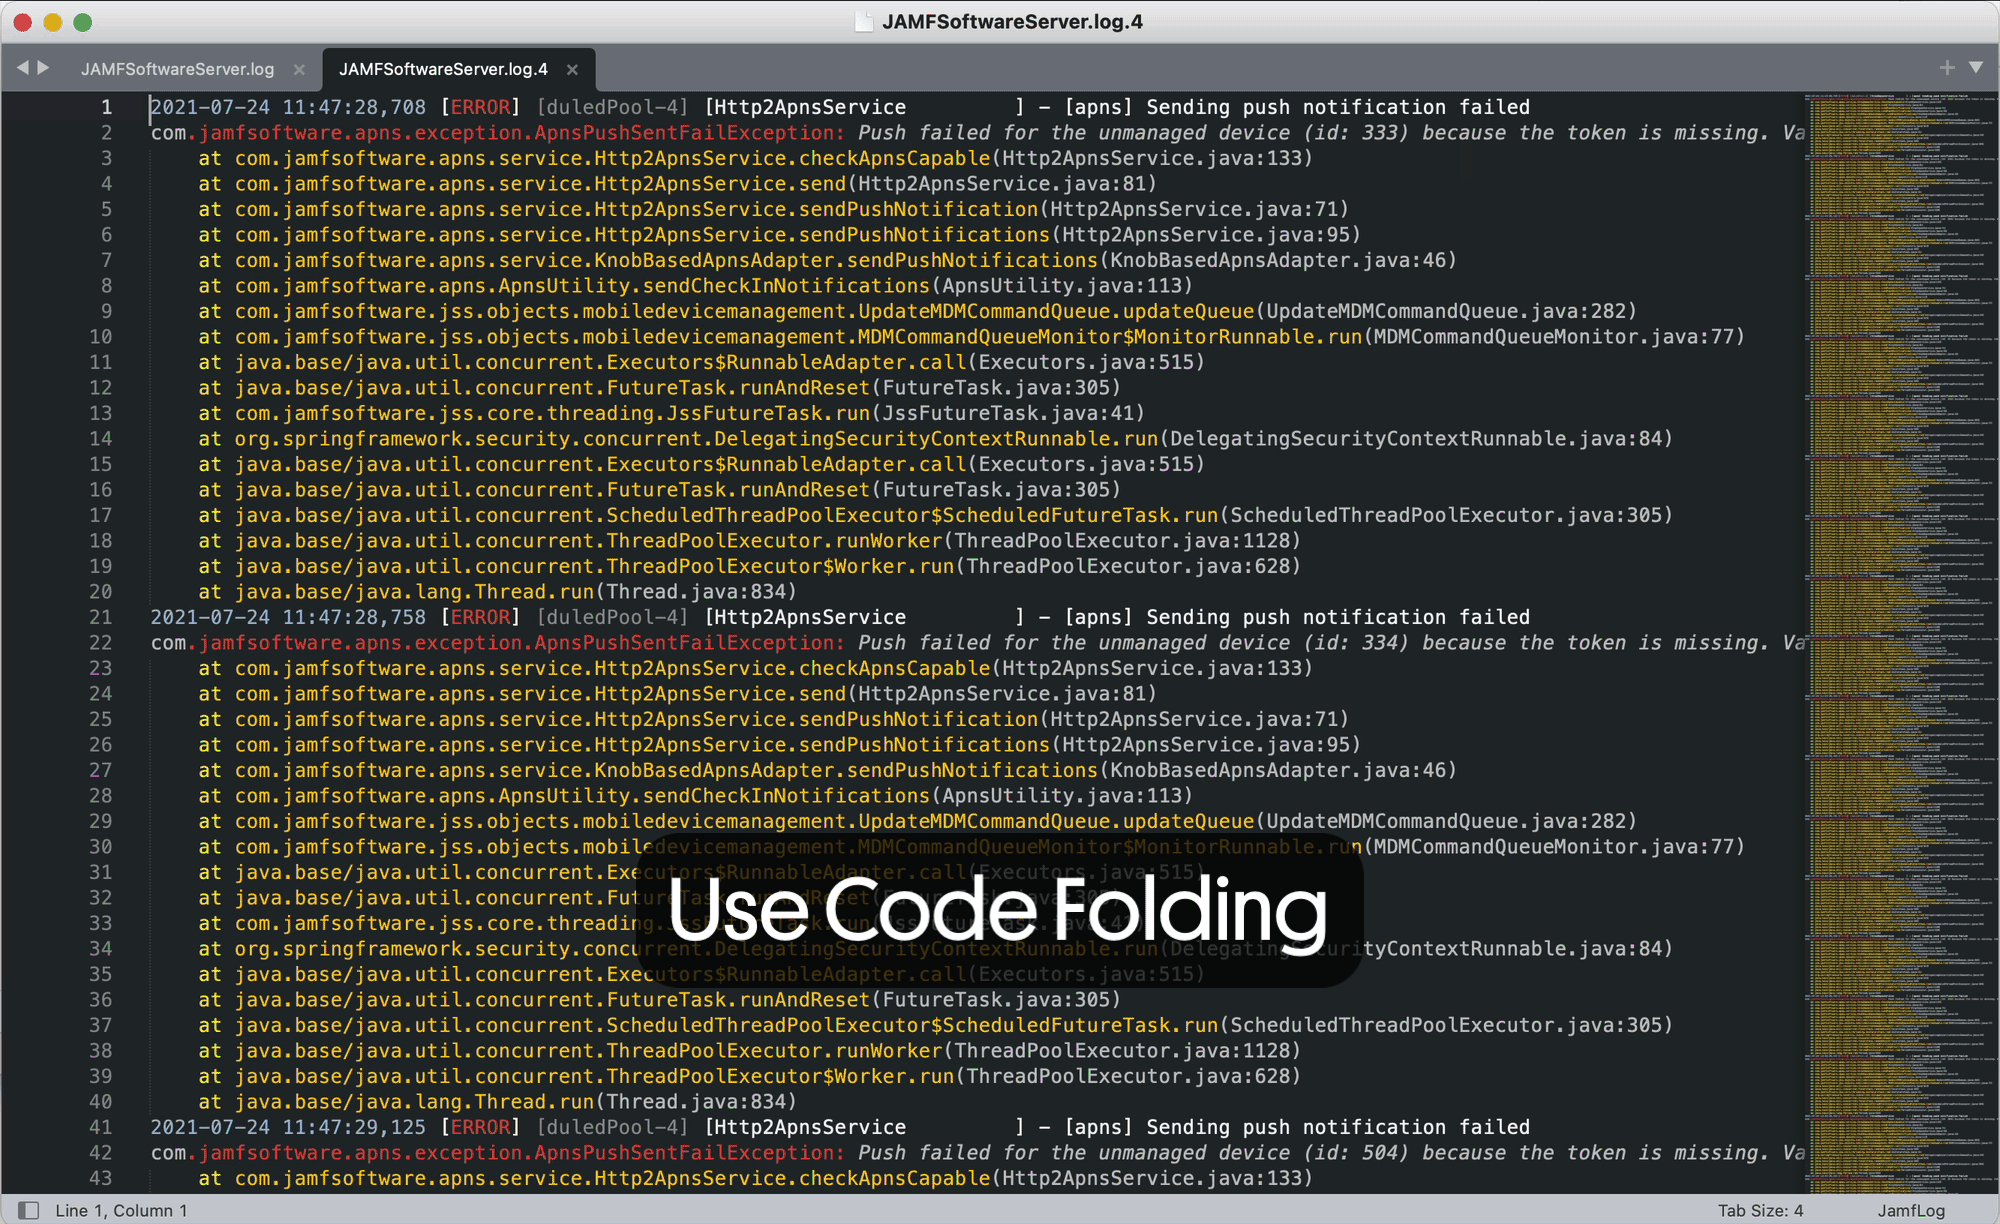 Code Folding makes the important lines stand out